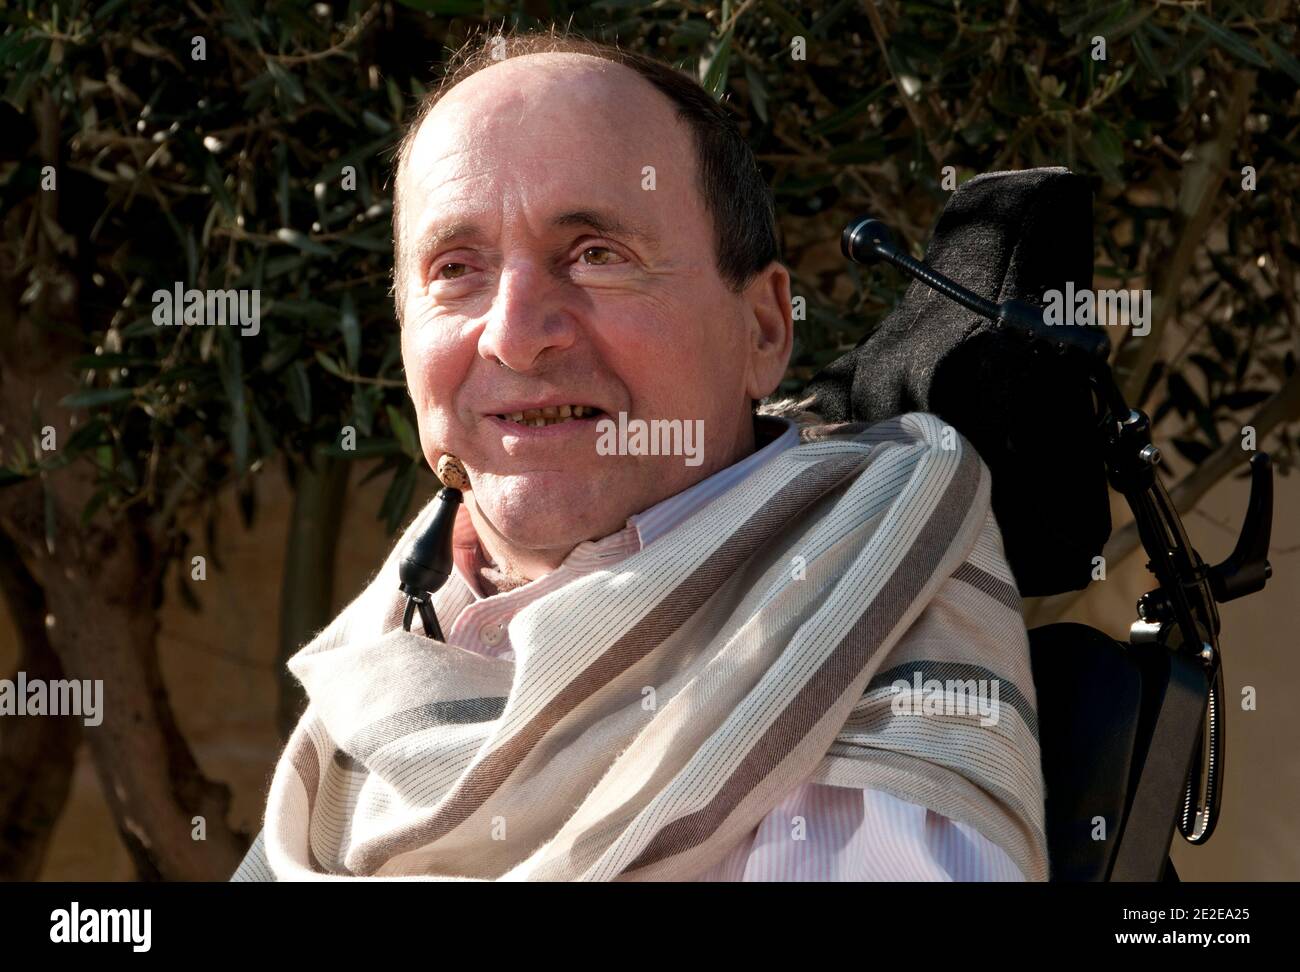 EXCLUSIVE - Philippe Pozzo di Borgo, who became quadriplegic after a paragliding accident in 1993, poses at his home in Essaouira, Morocco, November 15, 2011. His story inspired the movie 'Intouchables' directed by Olivier Nakache and Eric Toledano, released in France on November 2011, in which the actor Francois Cluzet plays his role and actor Omar Sy plays Abdel Seliou's role. In France, the movie reached 10 million of filmgoers. Photo by William Stevens/ABACAPRESS.COM Stock Photo